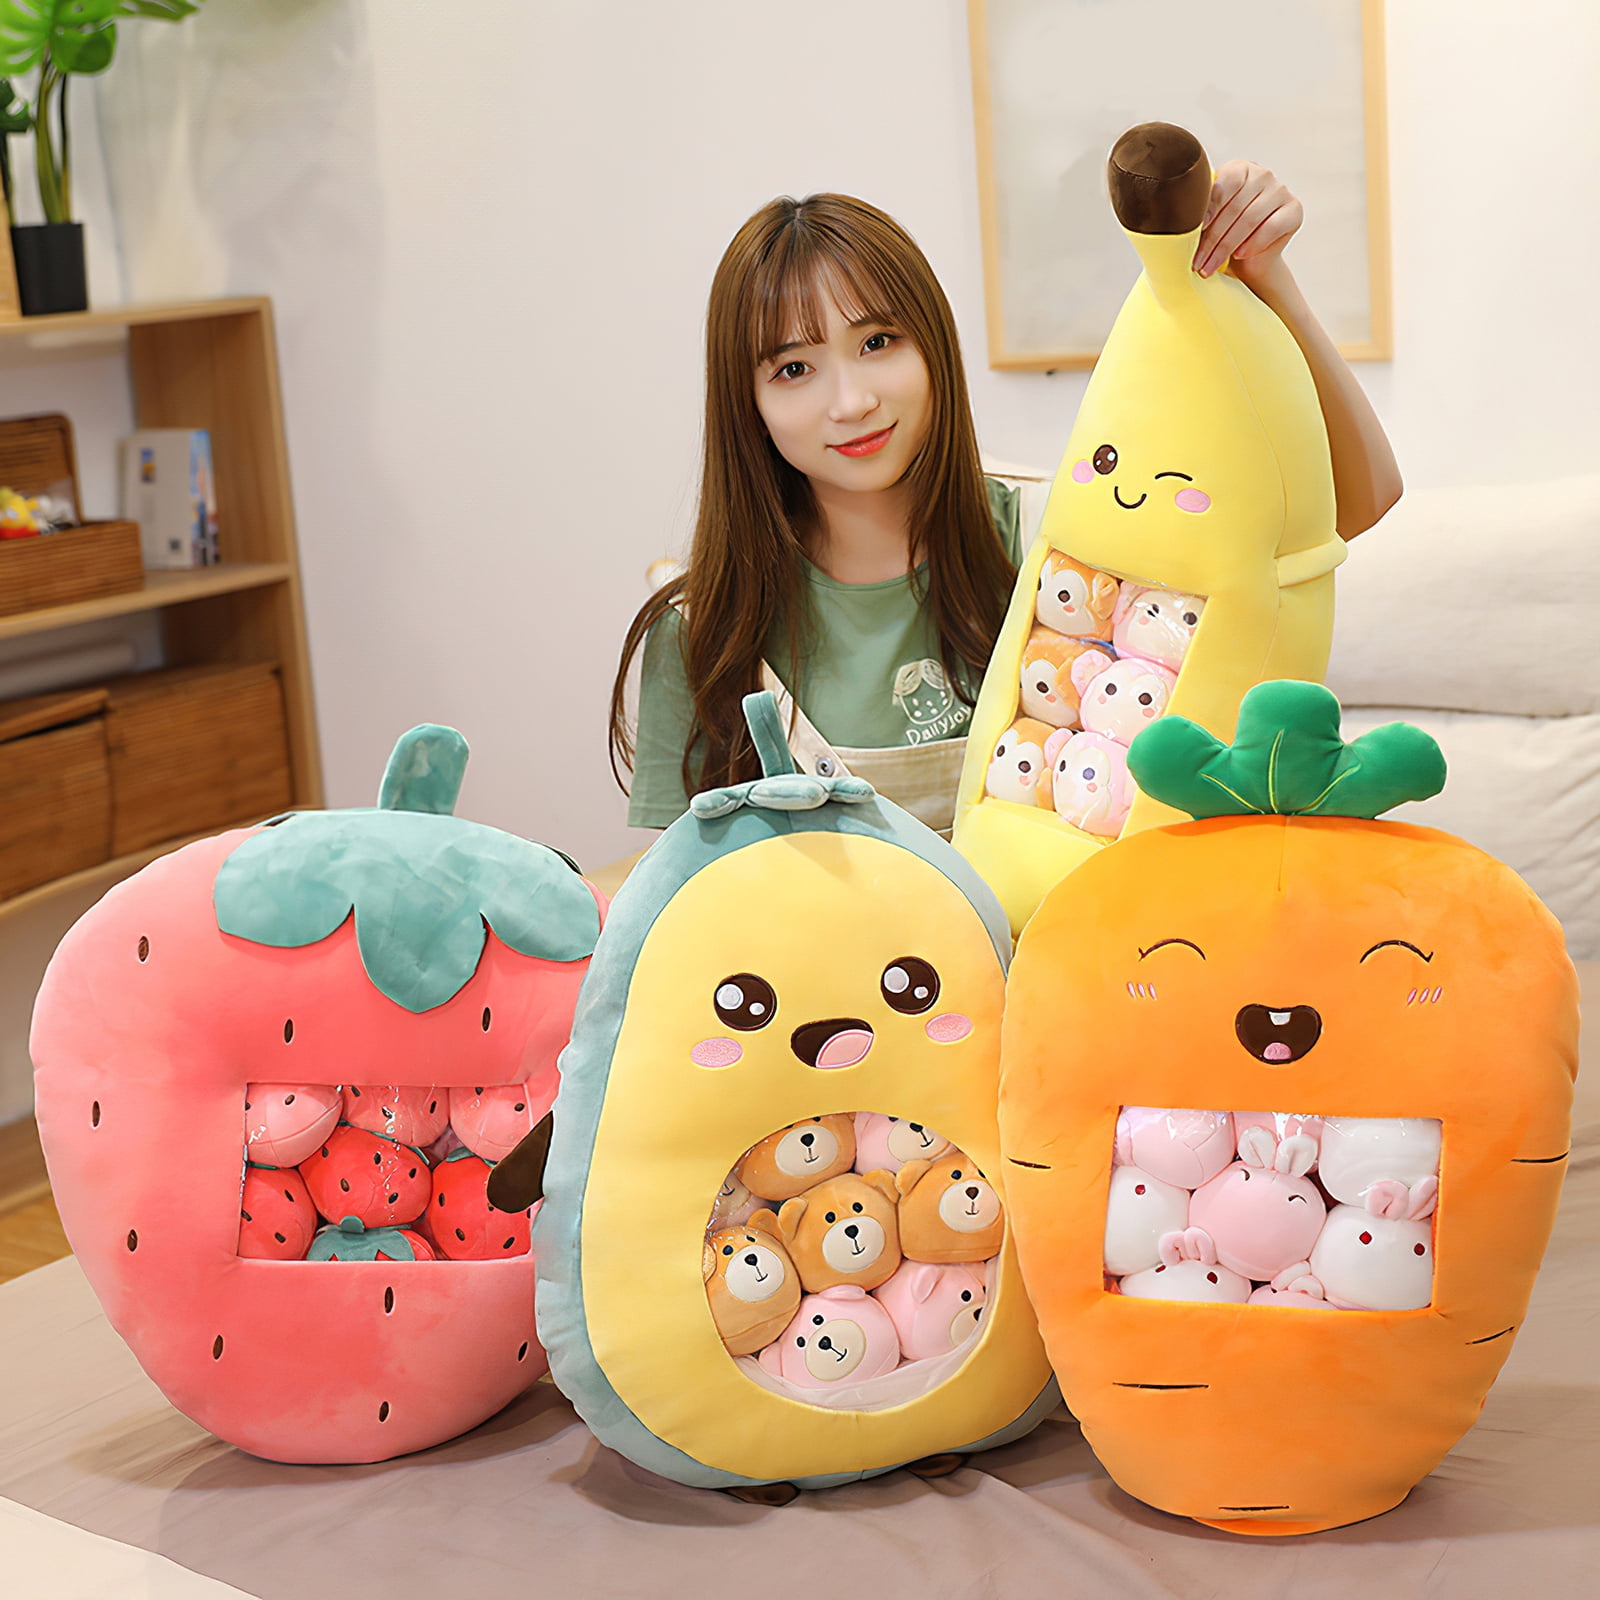 A Plushie Bag Pudding Soft Toy Simulation Innovative Snacks Doll Pillow Pad Gift 